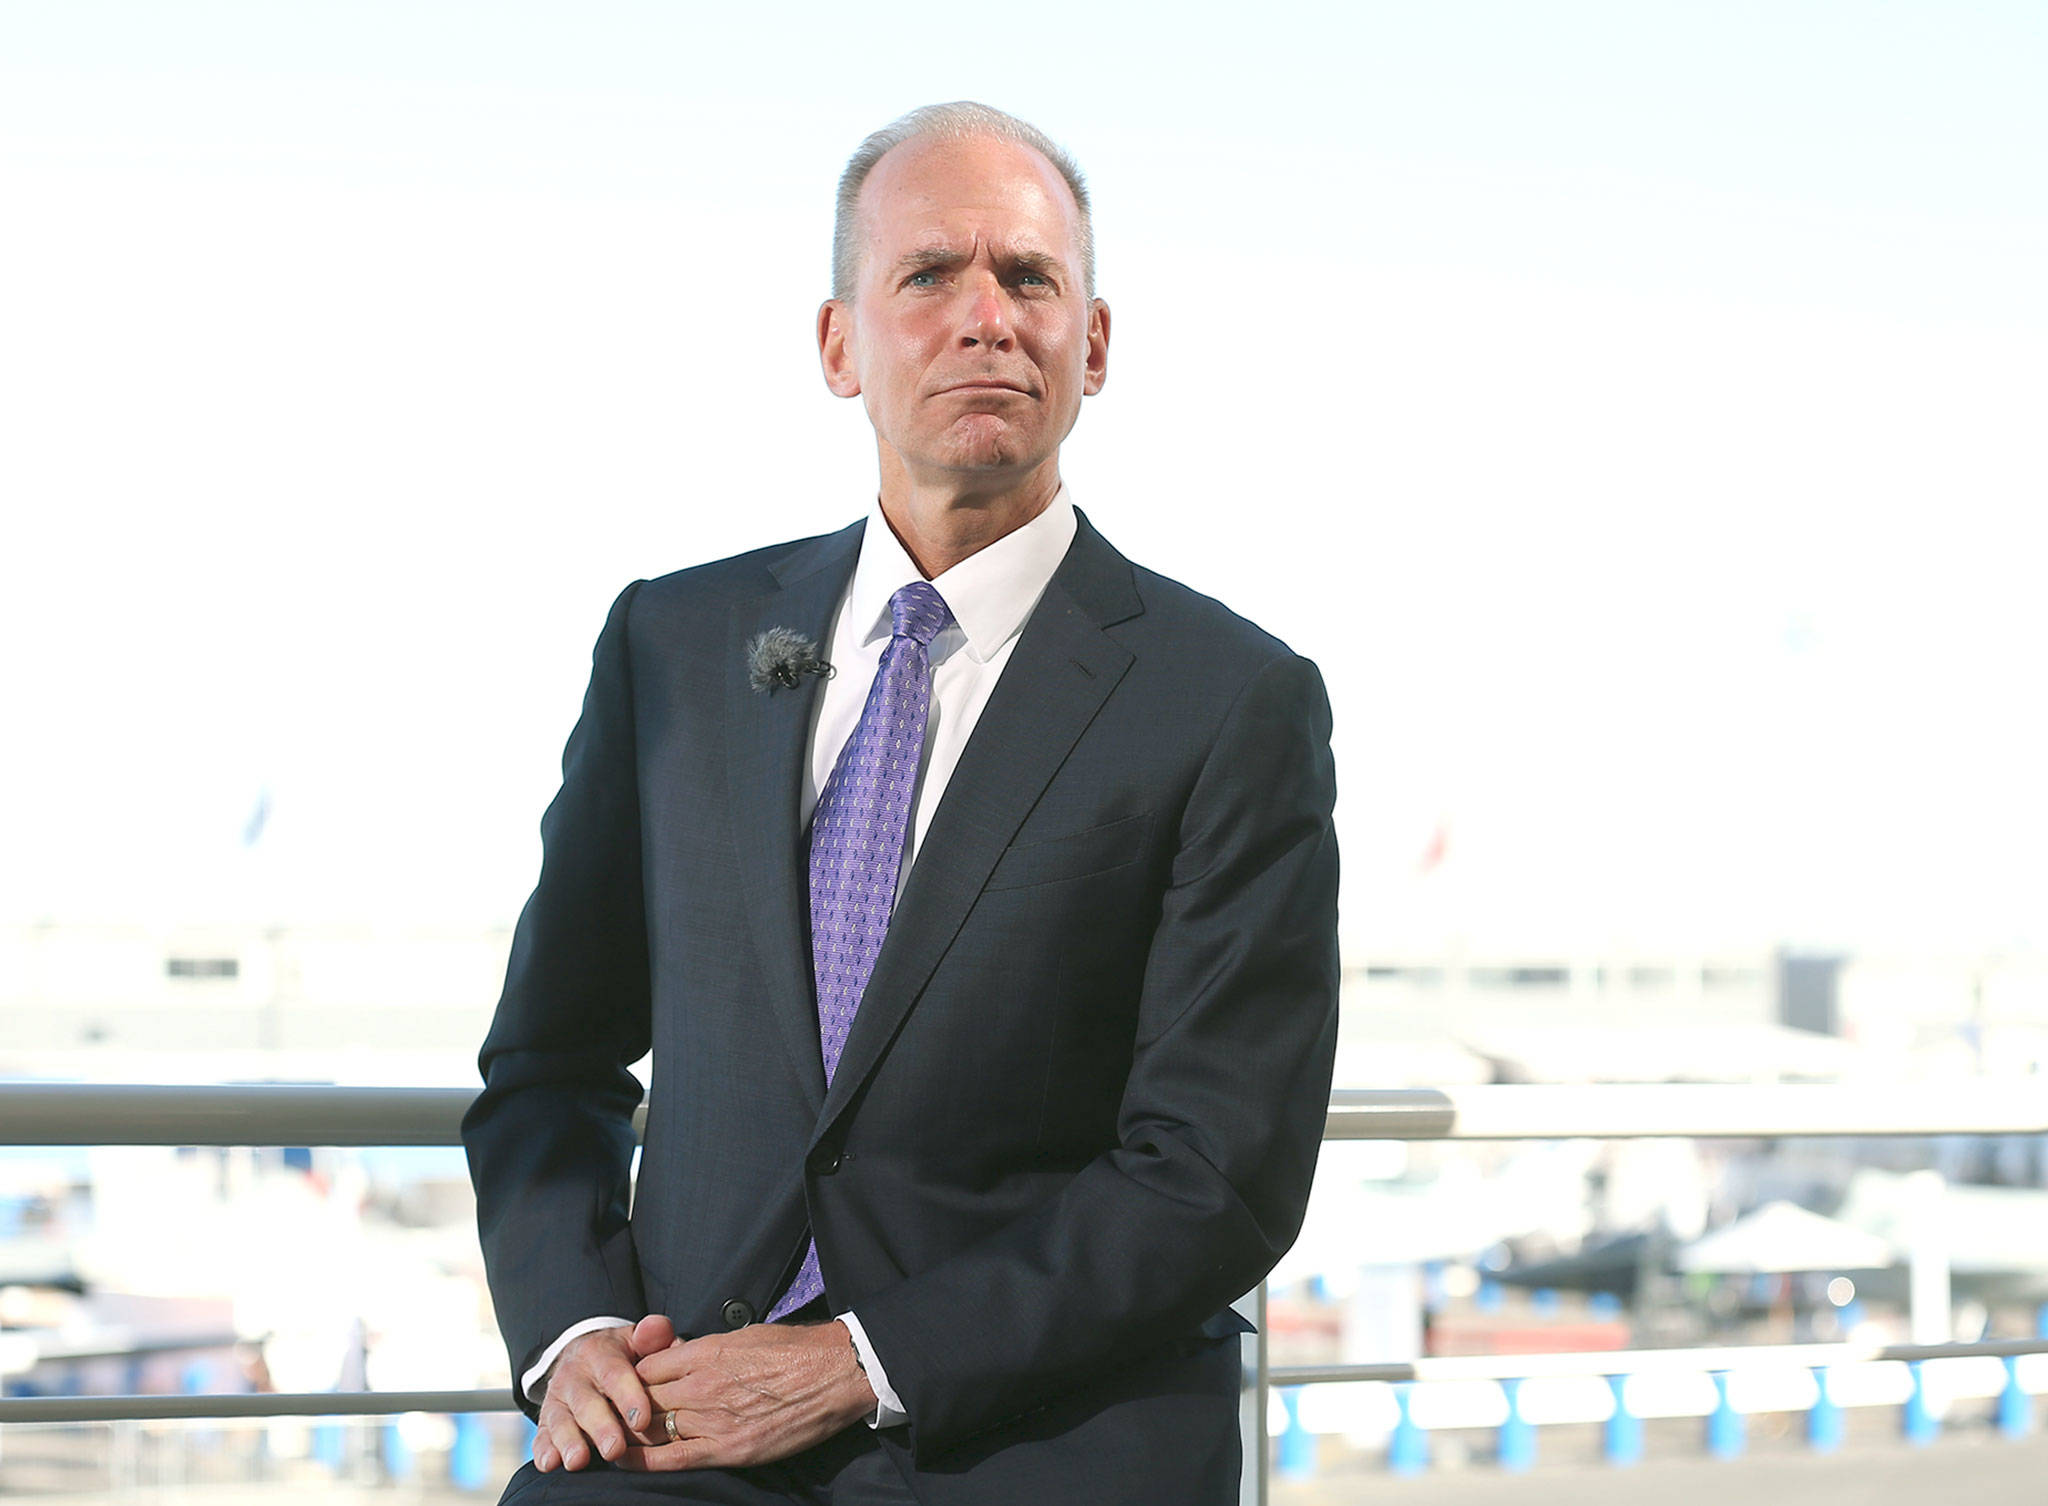 Boeing CEO Dennis Muilenburg during a television interview in 2017. (Marlene Awaad / Bloomberg News)